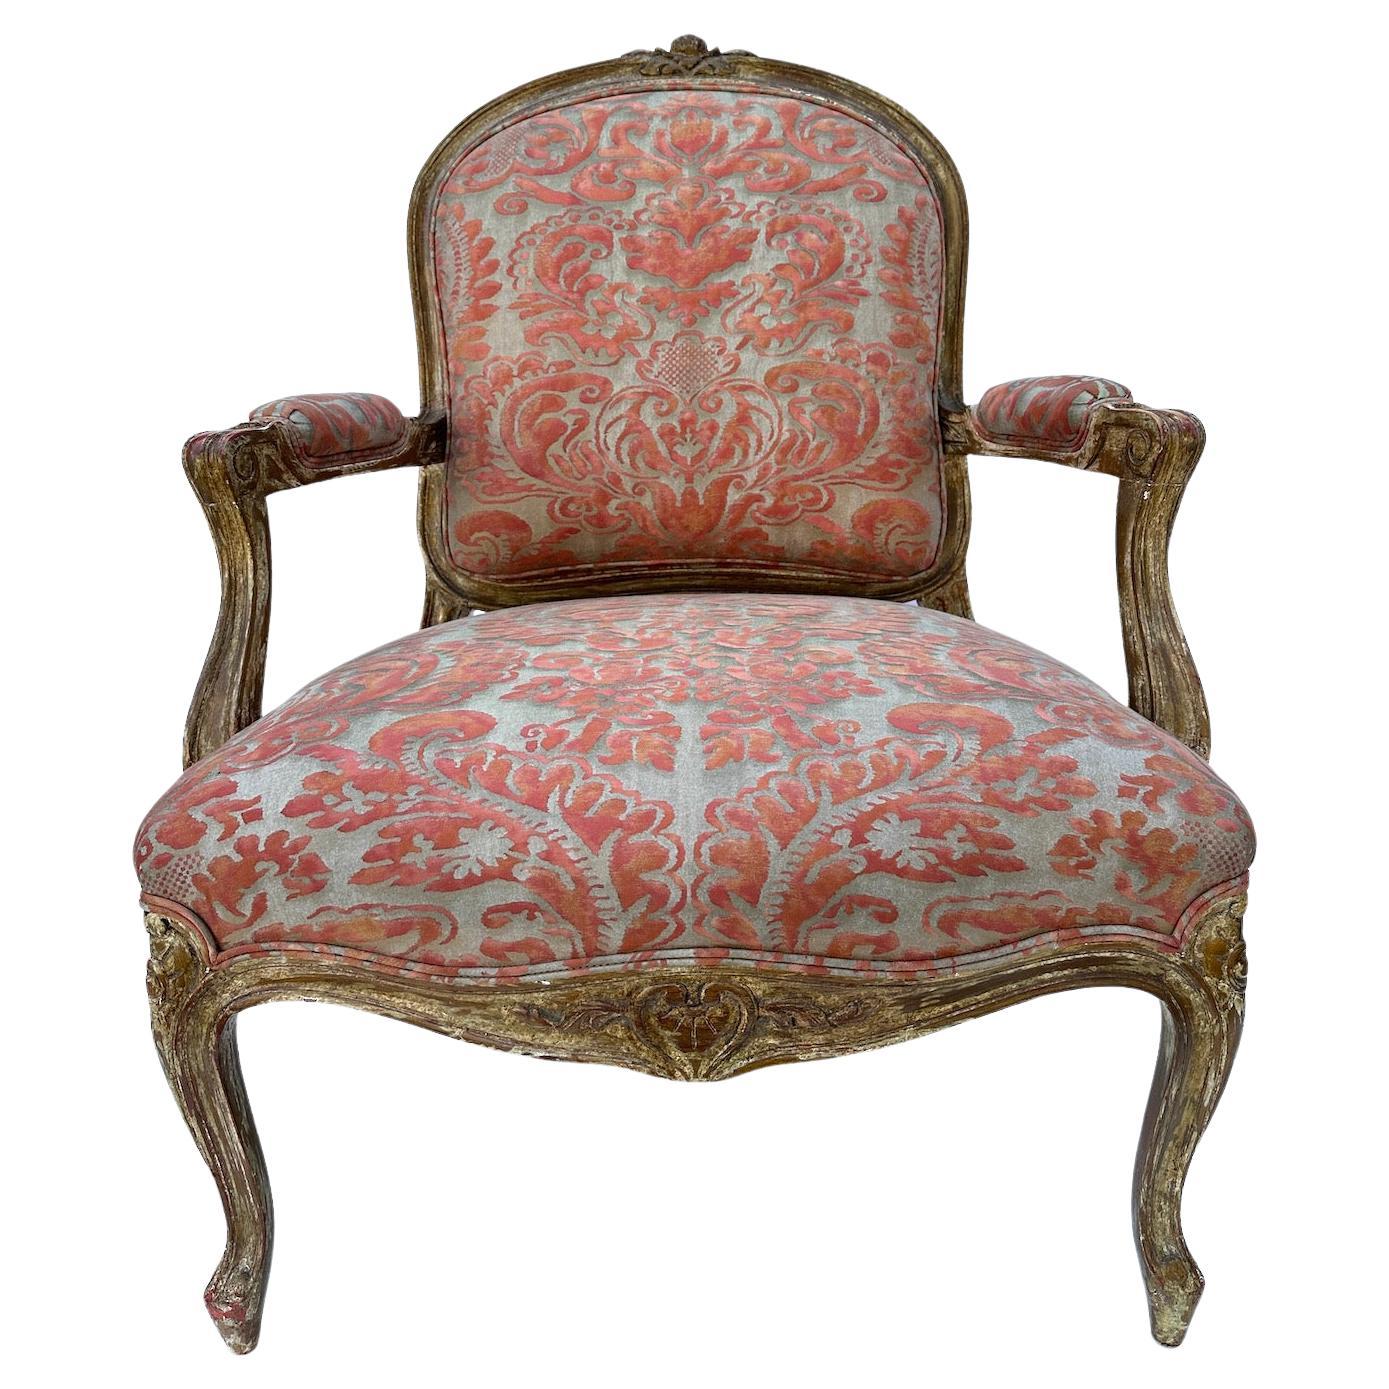 Pair of Louis XV style, hand-carved, hand-painted, polychromed and gilded armchairs.  Late 1800's.  Newly upholstered in Fortuny fabric.